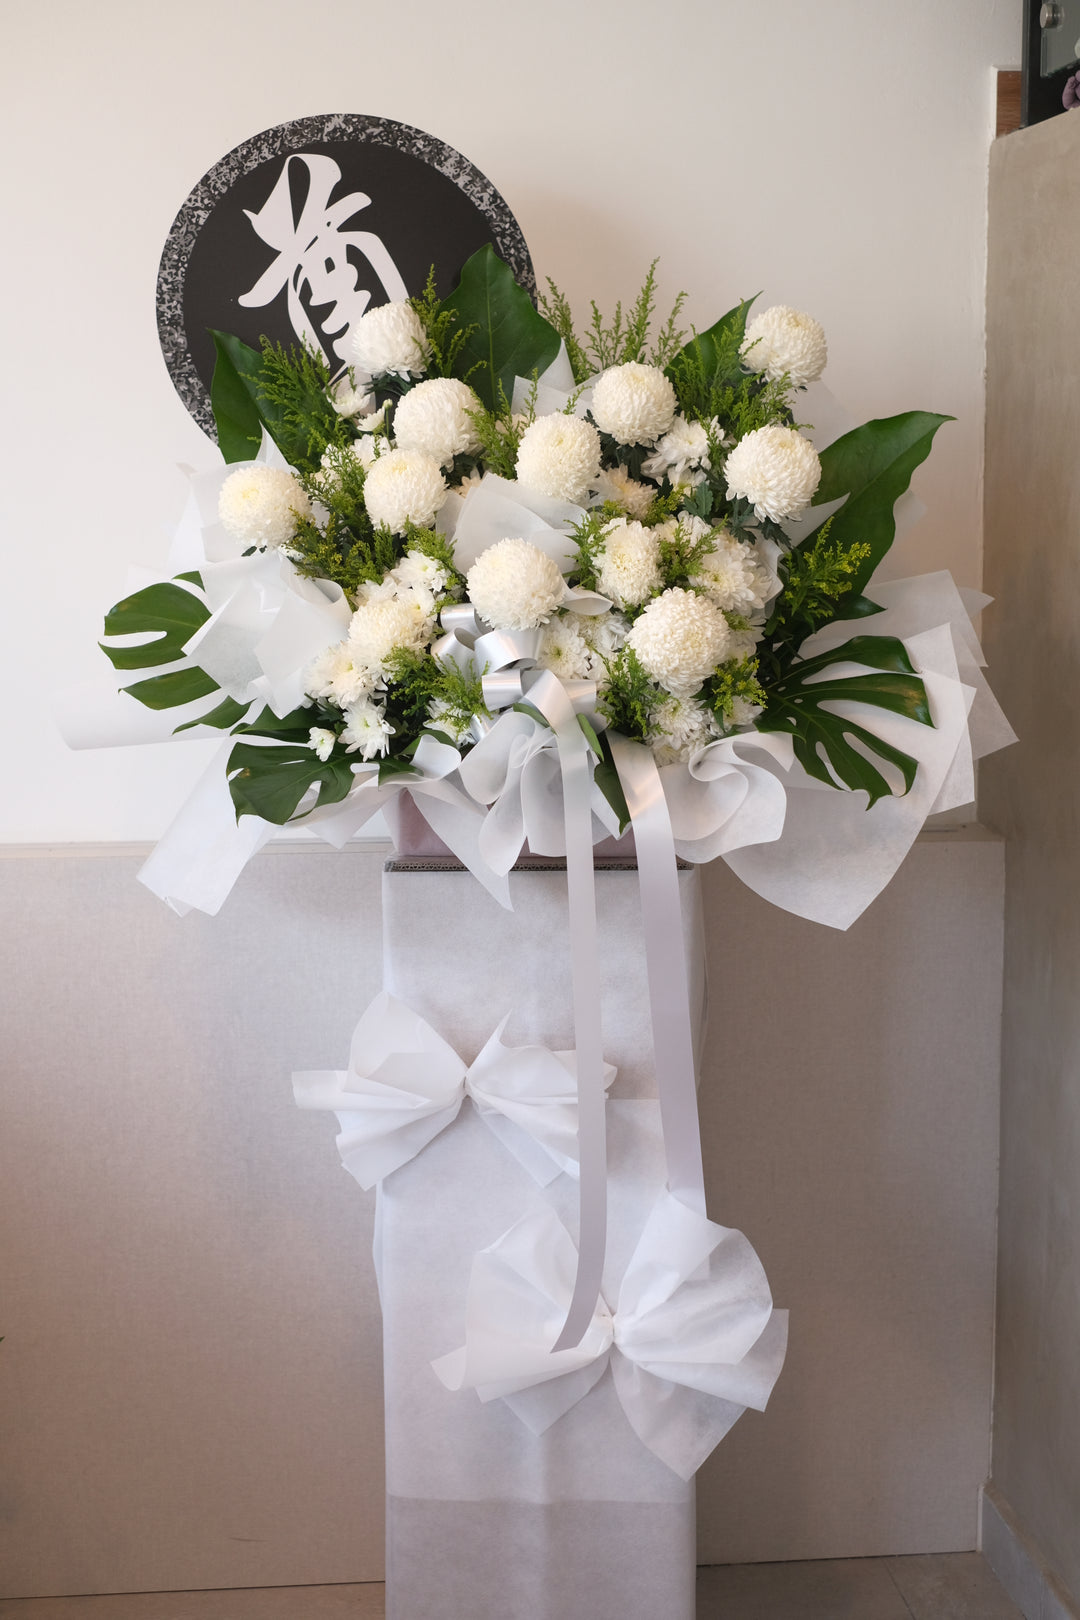 white chrysanthemum stand for funeral delivery in penang